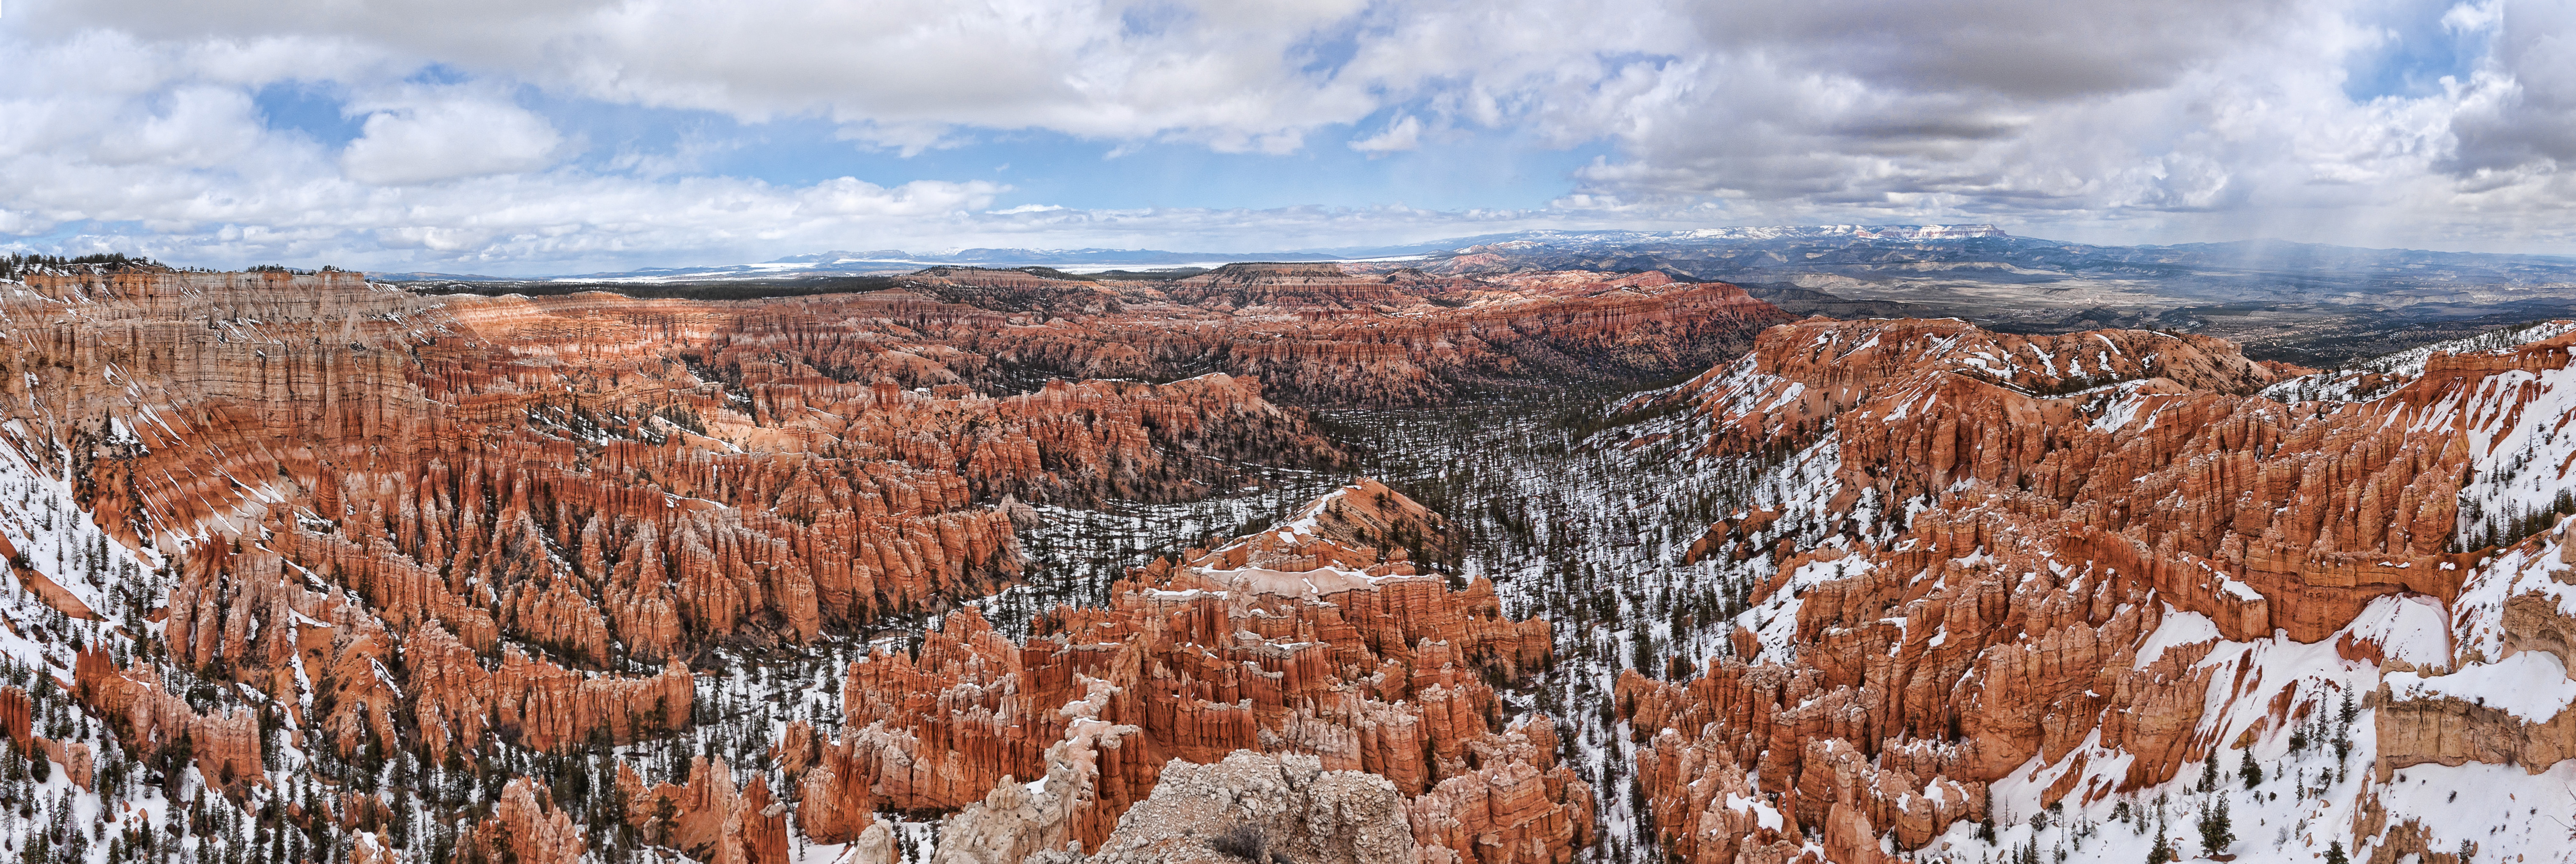 Bryce Canyon svg #5, Download drawings